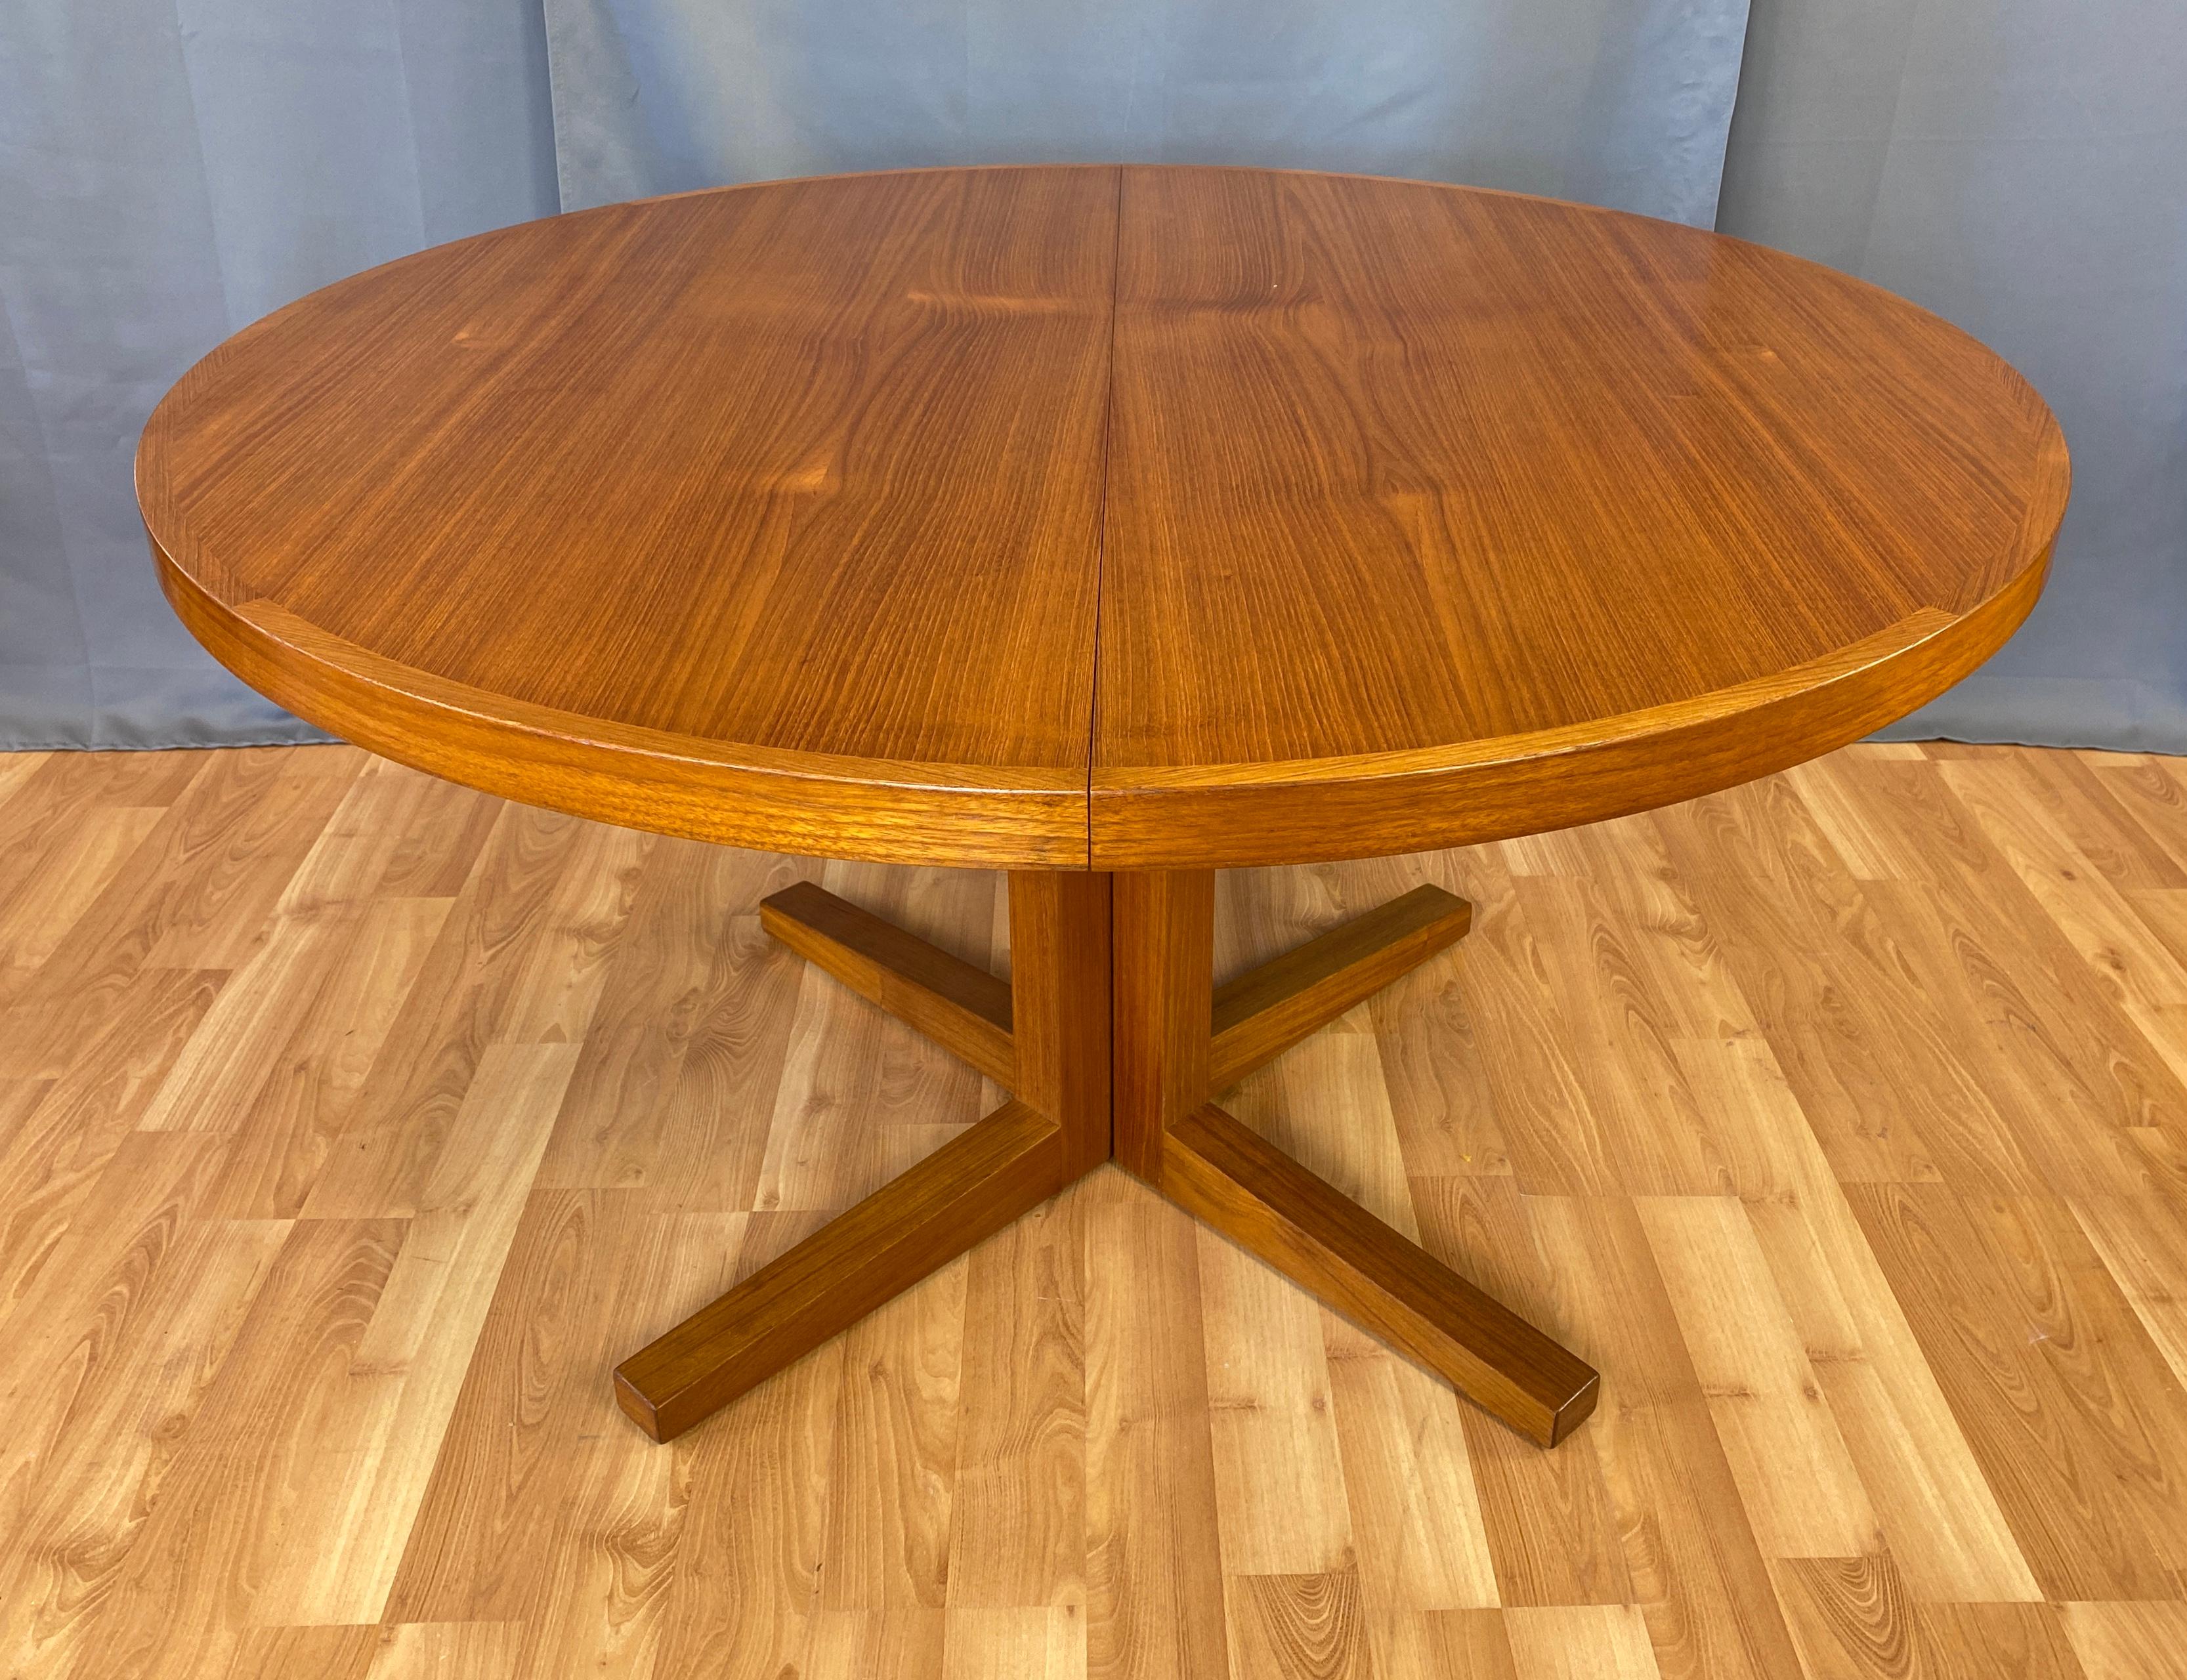 Offer here is a handsome teak dining table designed by John Mortensen for Heltborg Møbler, circa 1960s.
Starts off with central pedestal, and round top, when leaves are added the pedestal splits in half and each leaf turns into a larger